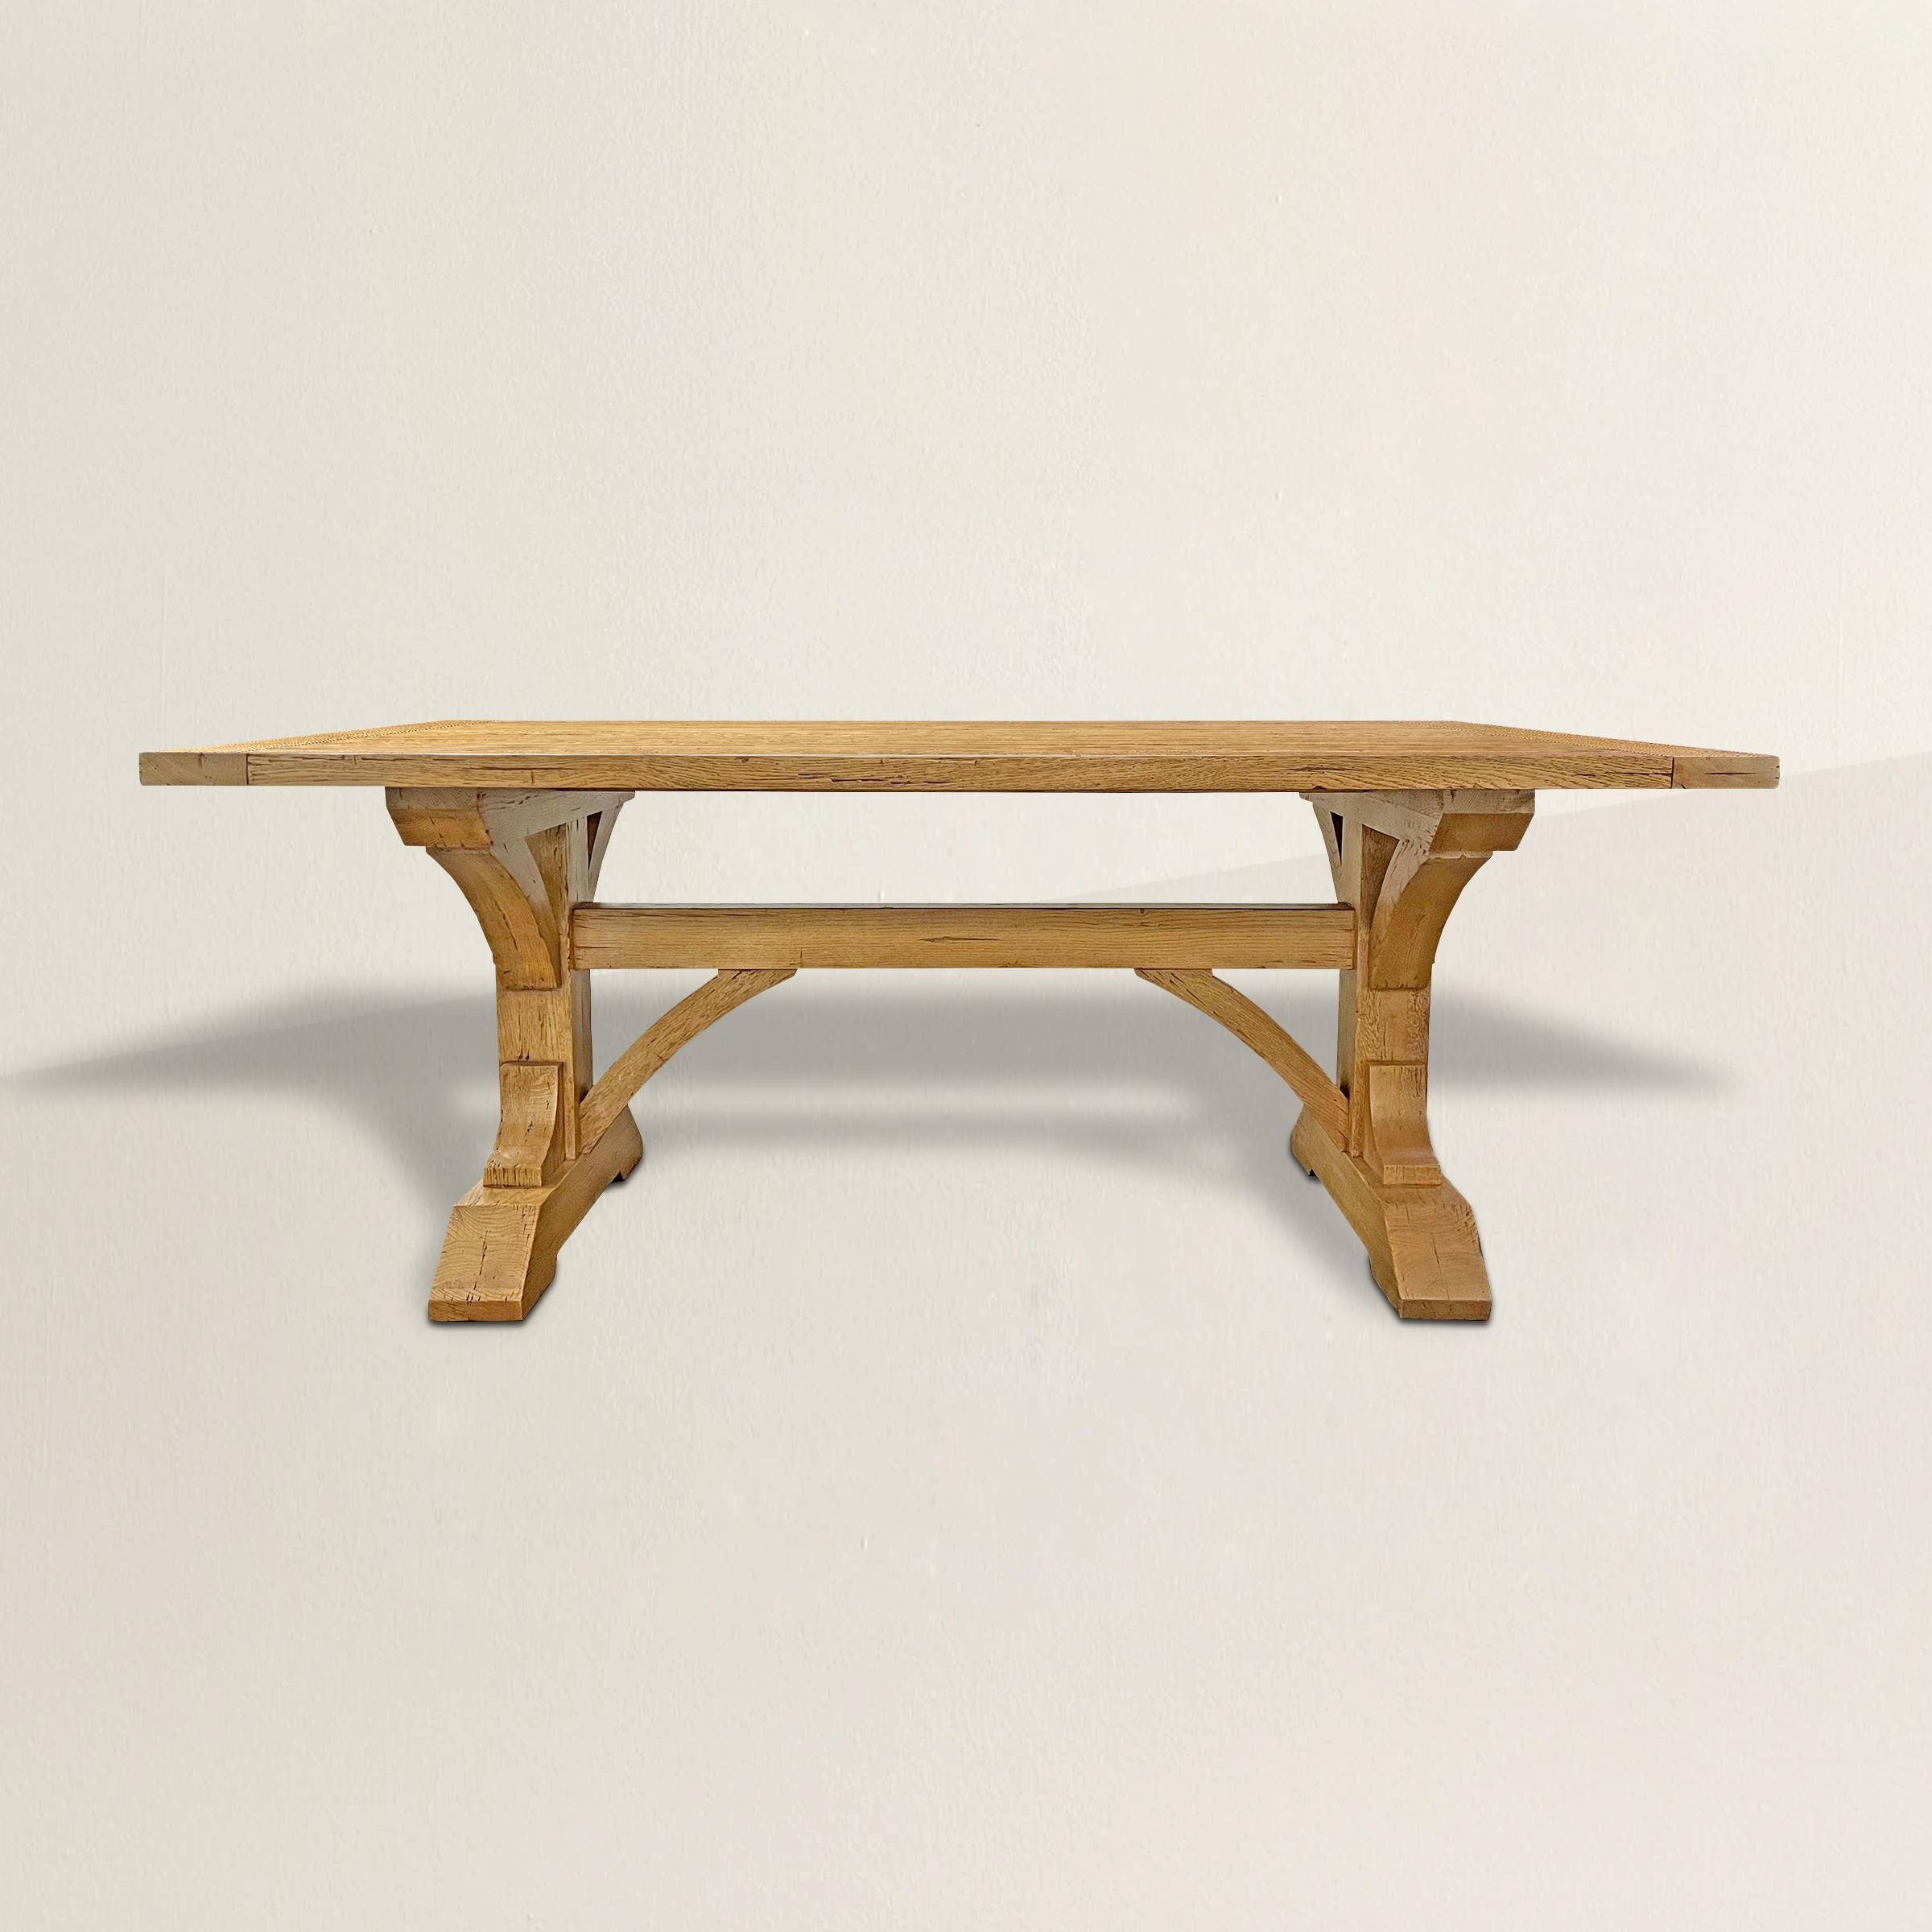 An incredible 20th century American hand-crafted solid white oak timber-frame dining table reminiscent of ancient wooden ships or medieval architecture. The table is perfectly sized to fit eight people (three on each side and one at each end), used